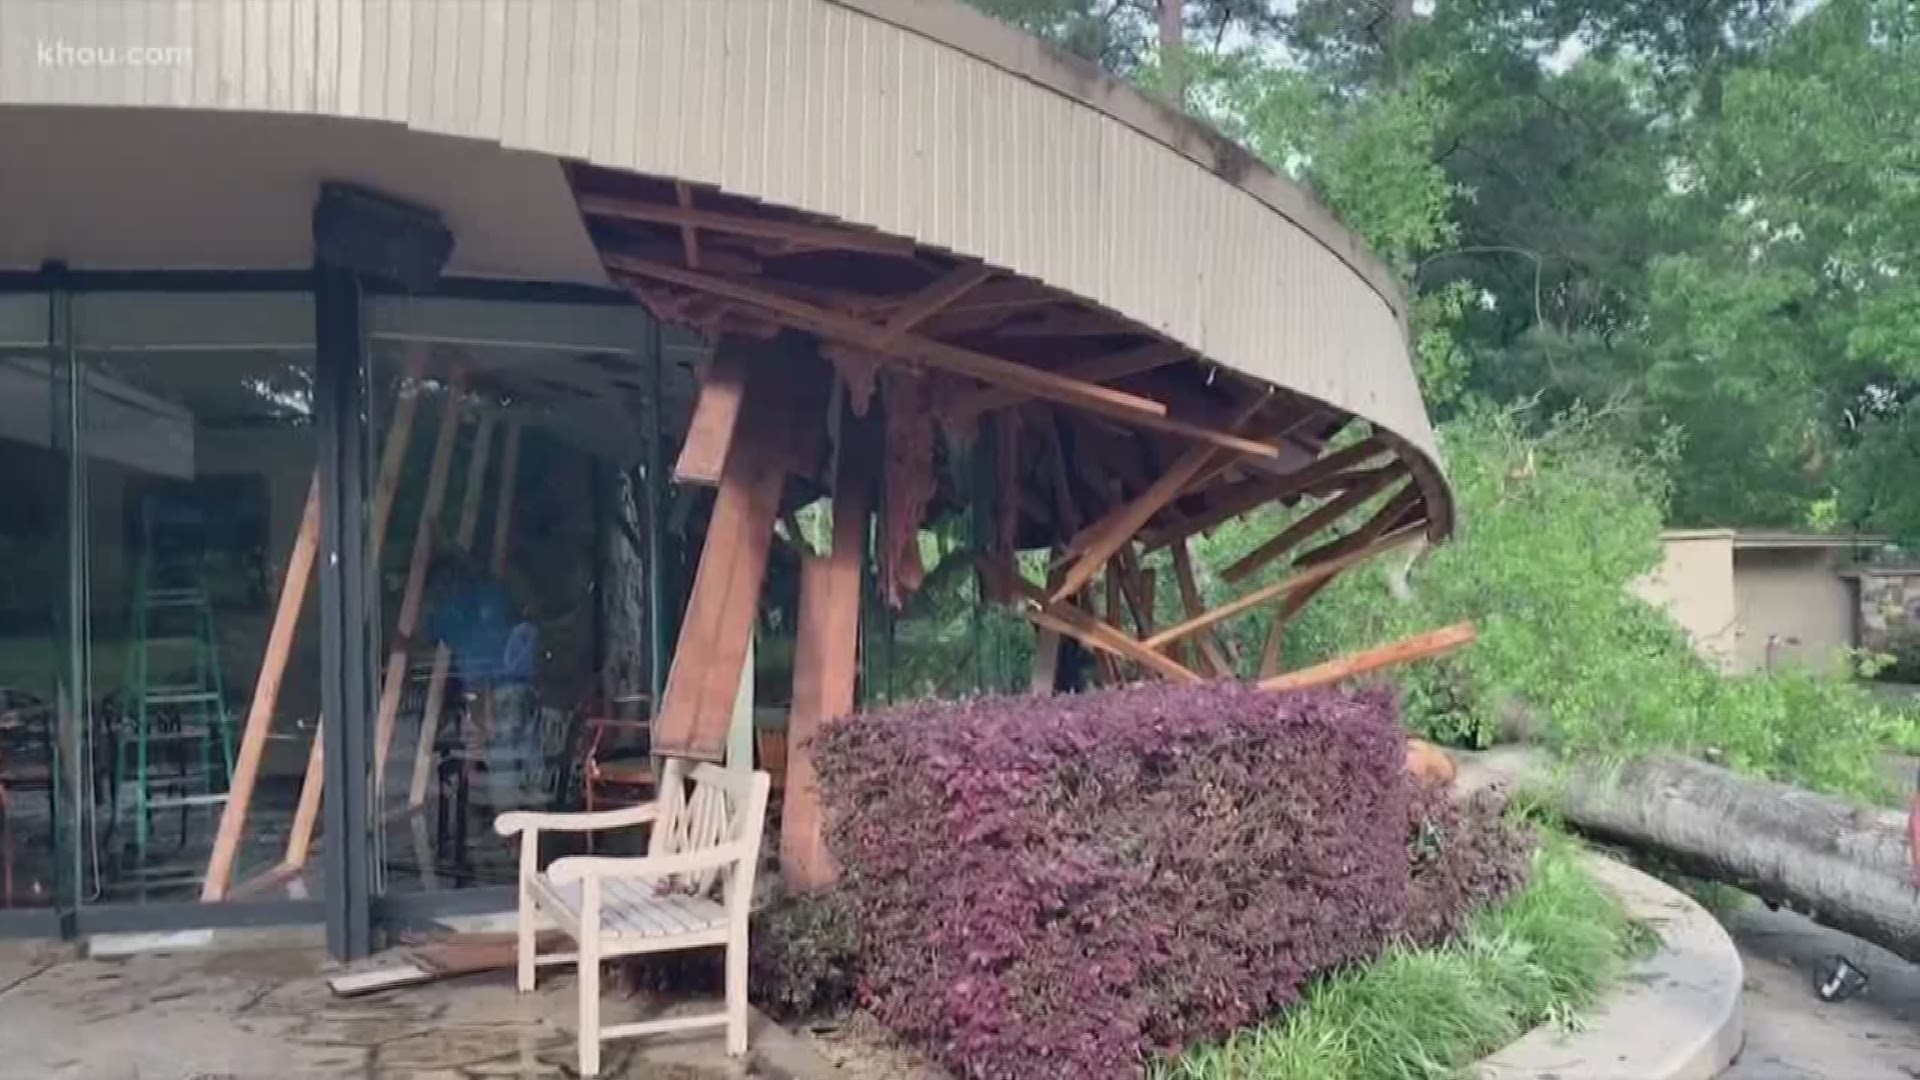 There is widespread damage from a massive storm system that blew through the Houston area.